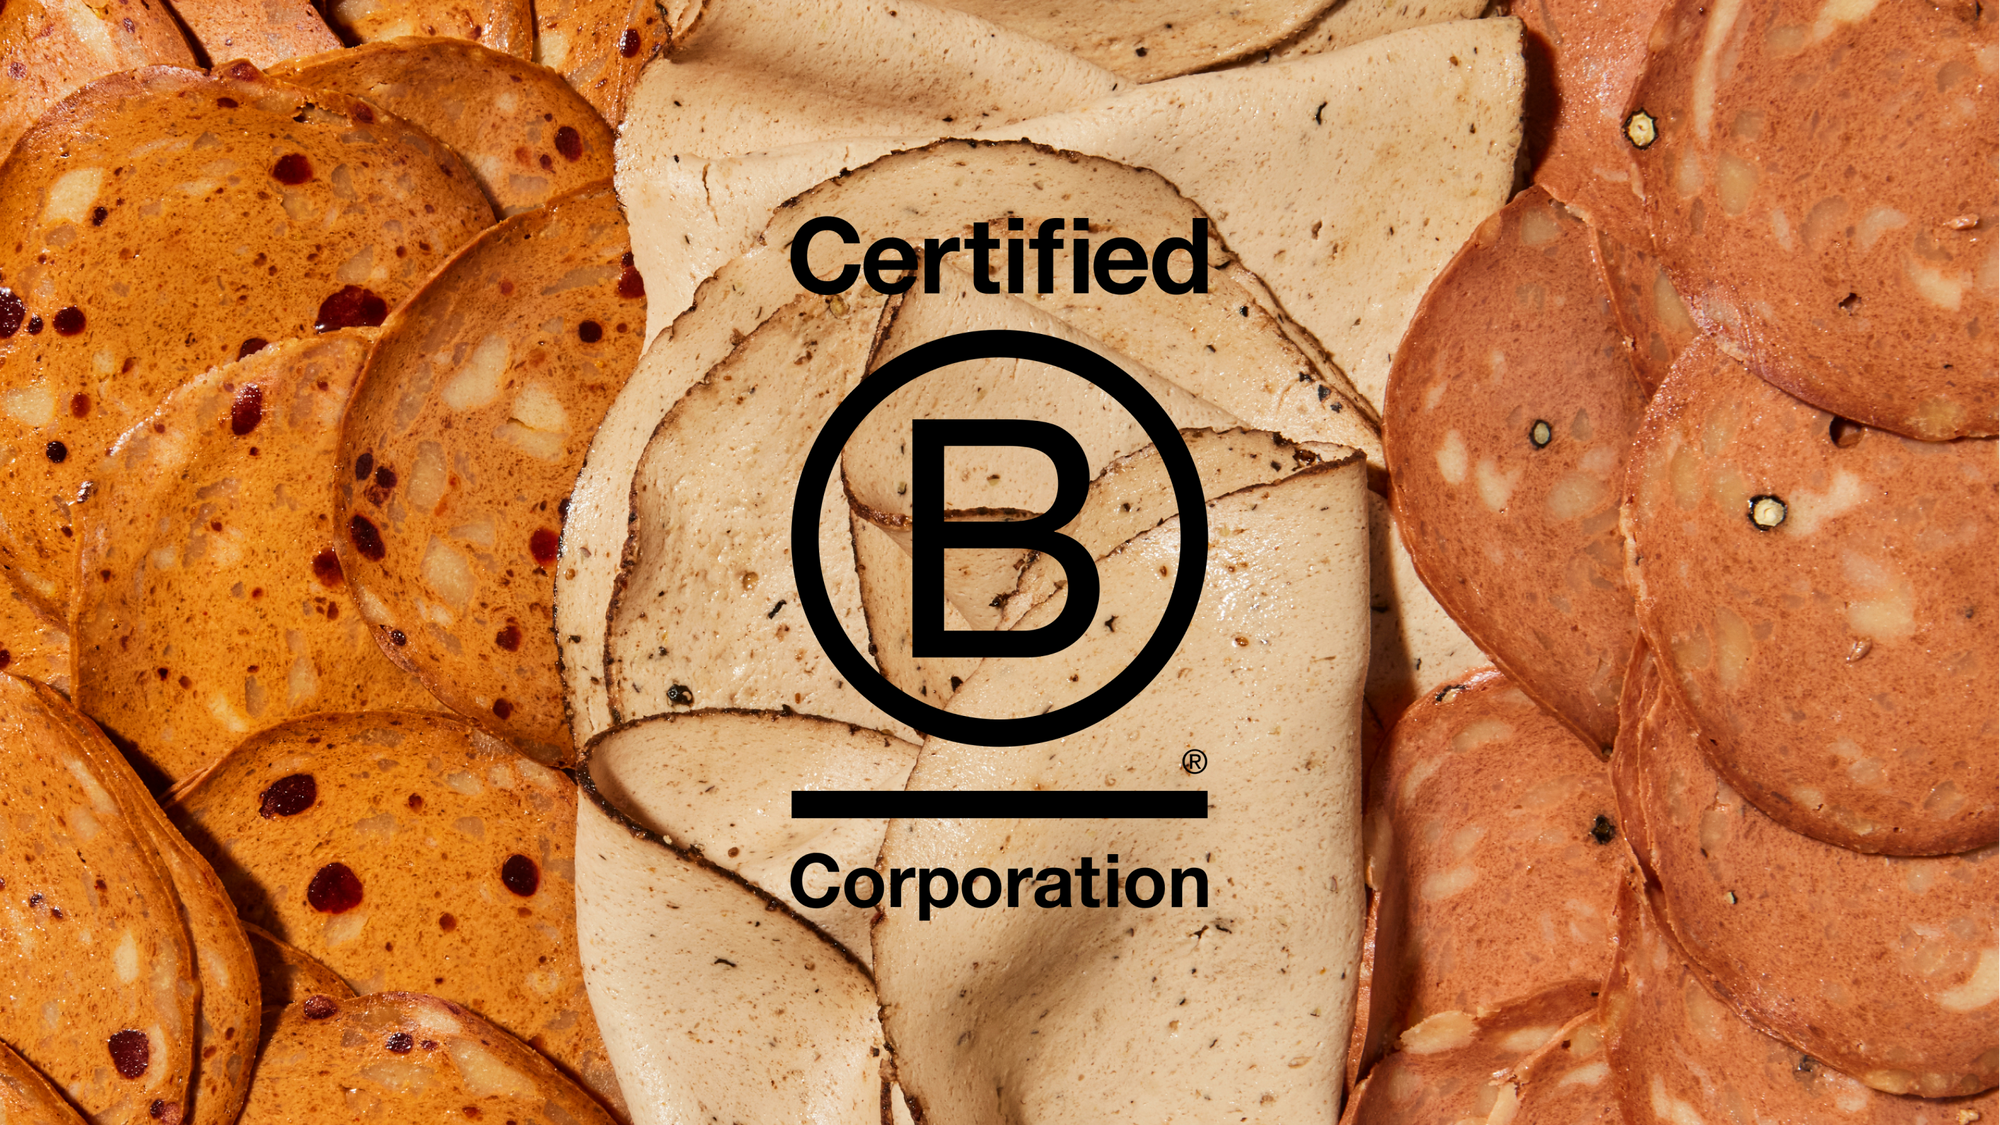 WE’RE A CERTIFIED B-CORP!